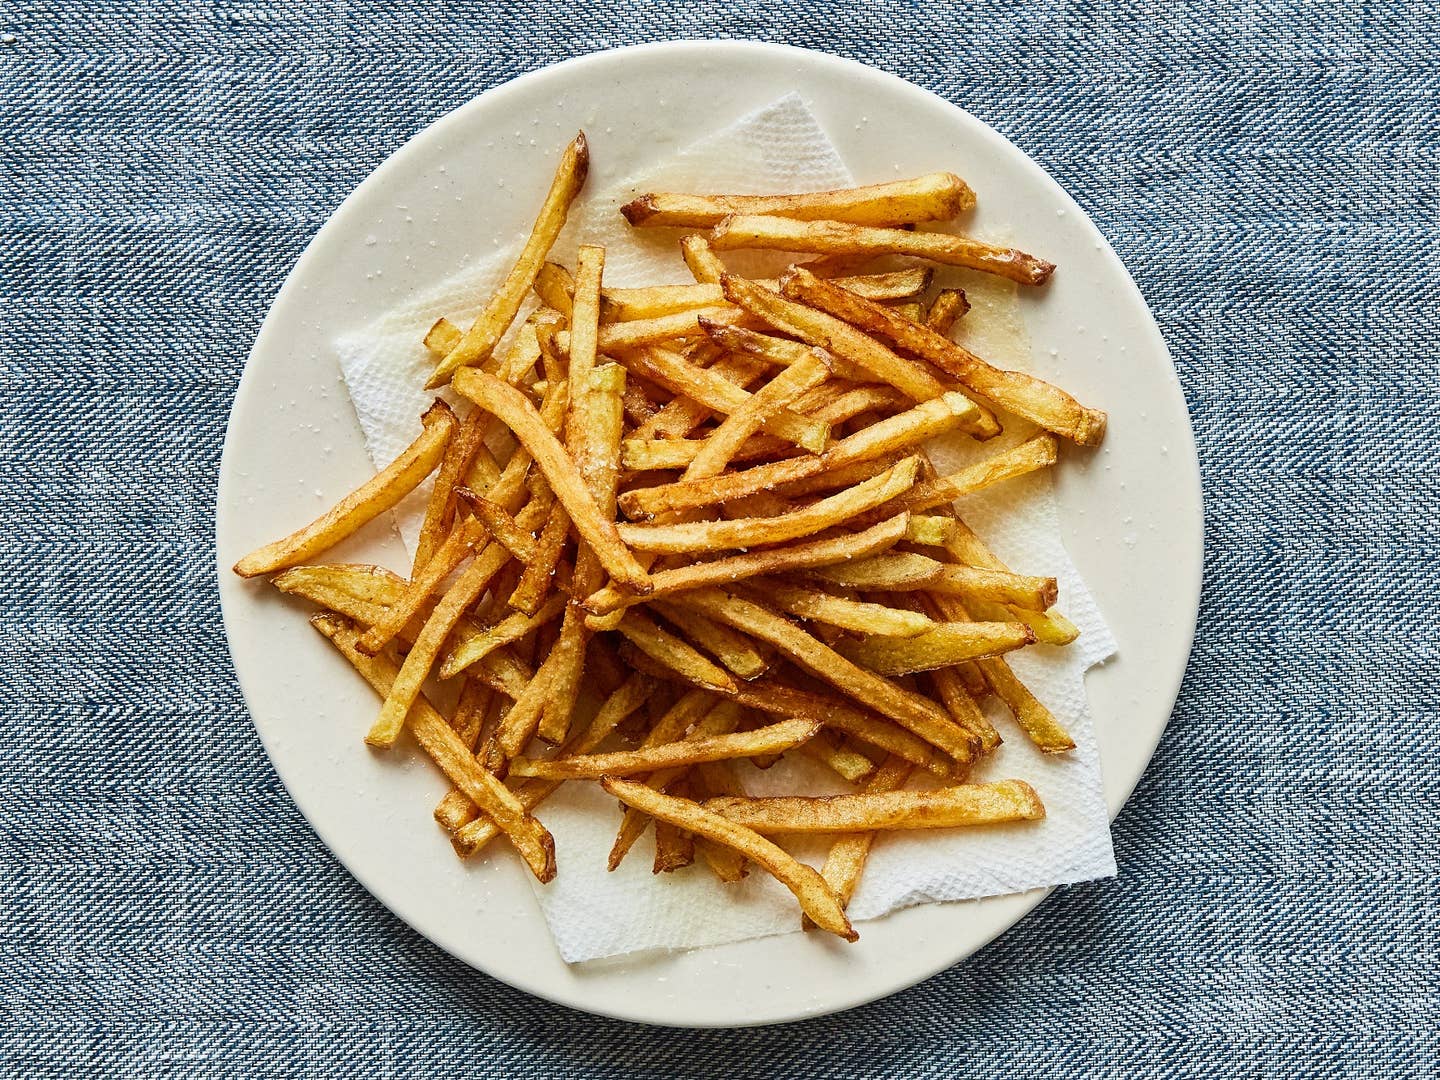 The World’s Best French Fries